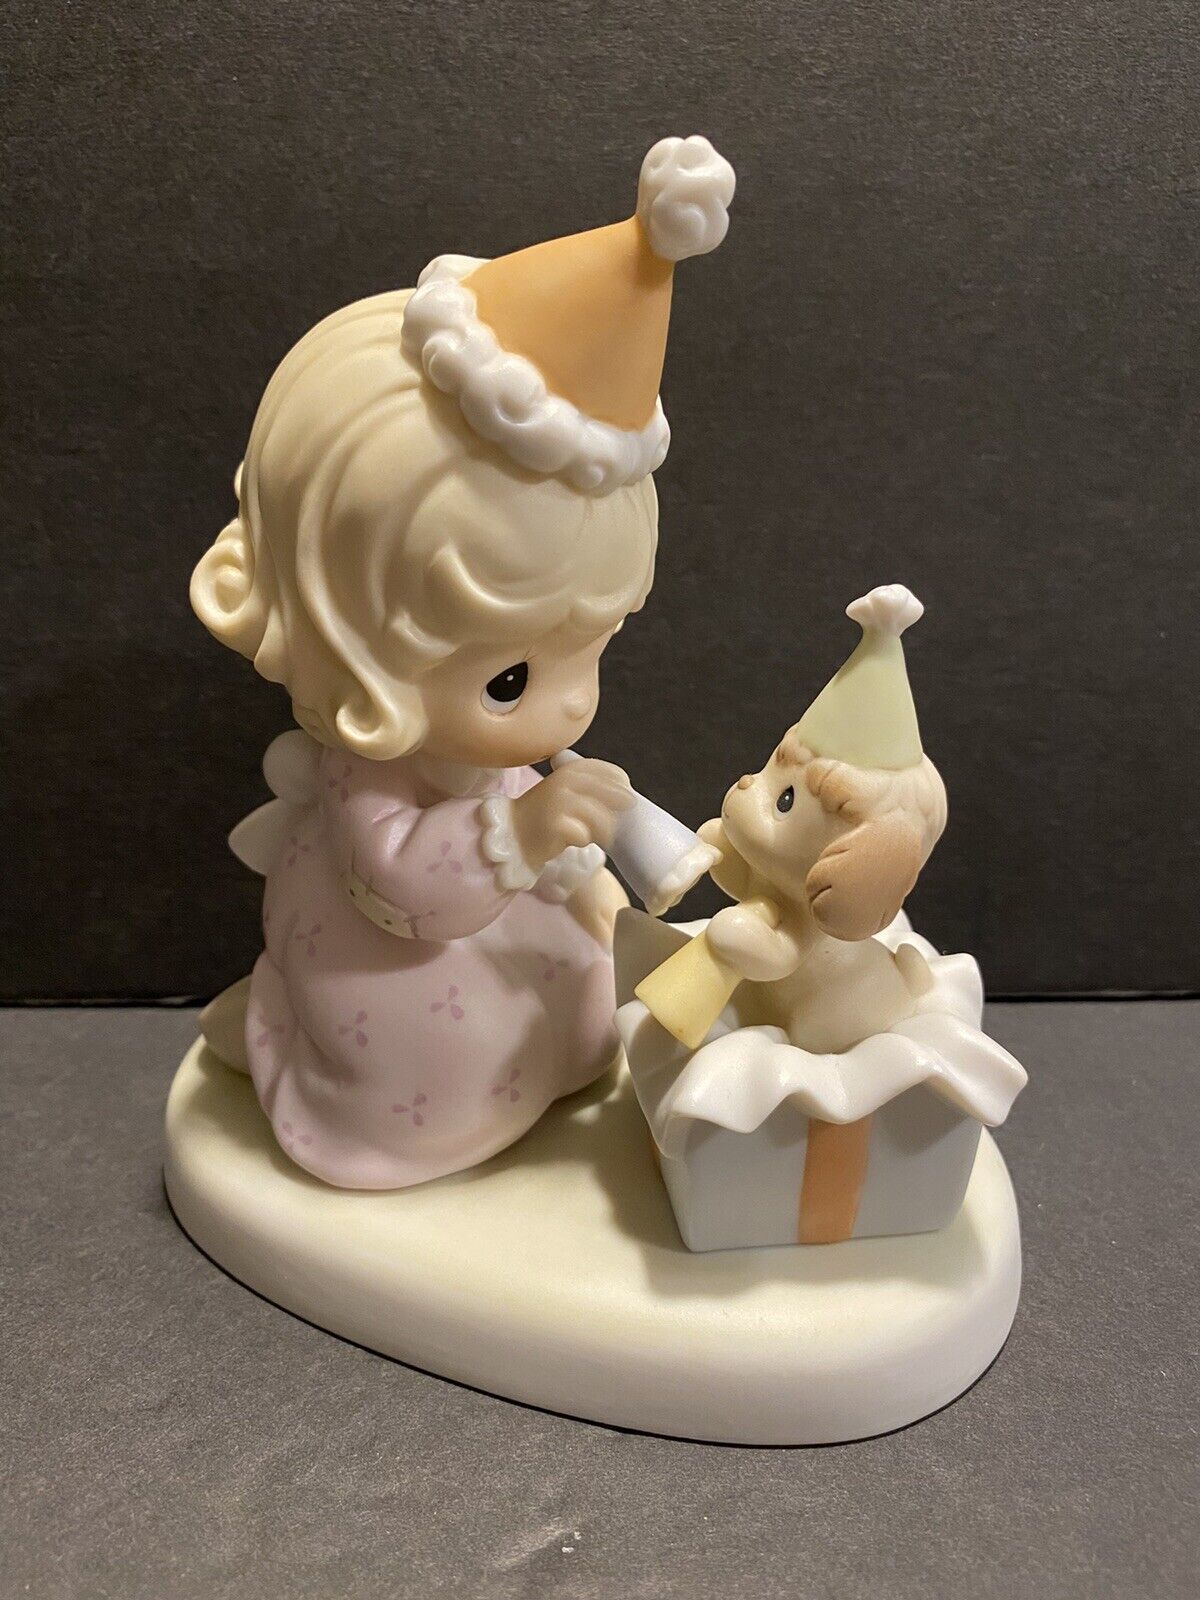 Precious Moments Wishing You a Birthday Full of Surprises 2000 795313 Figurine!